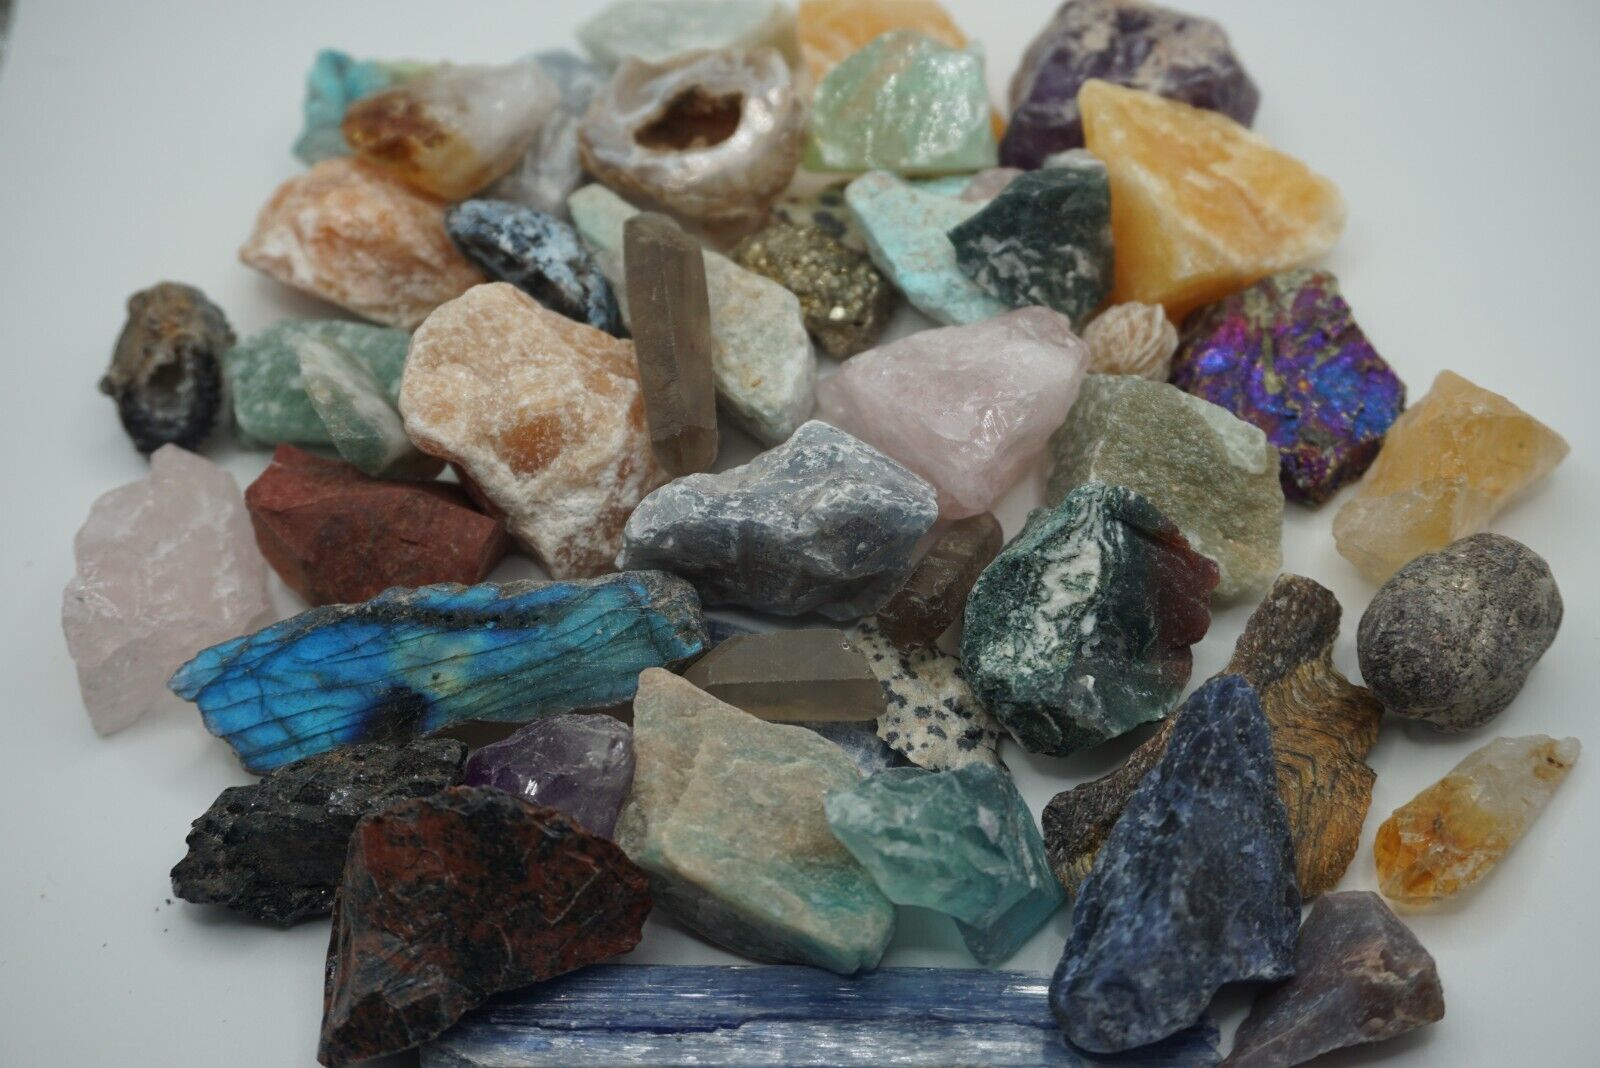 Crafters Collection 1 Lb Natural Crystals Mineral Specimens Mixed Gemstones